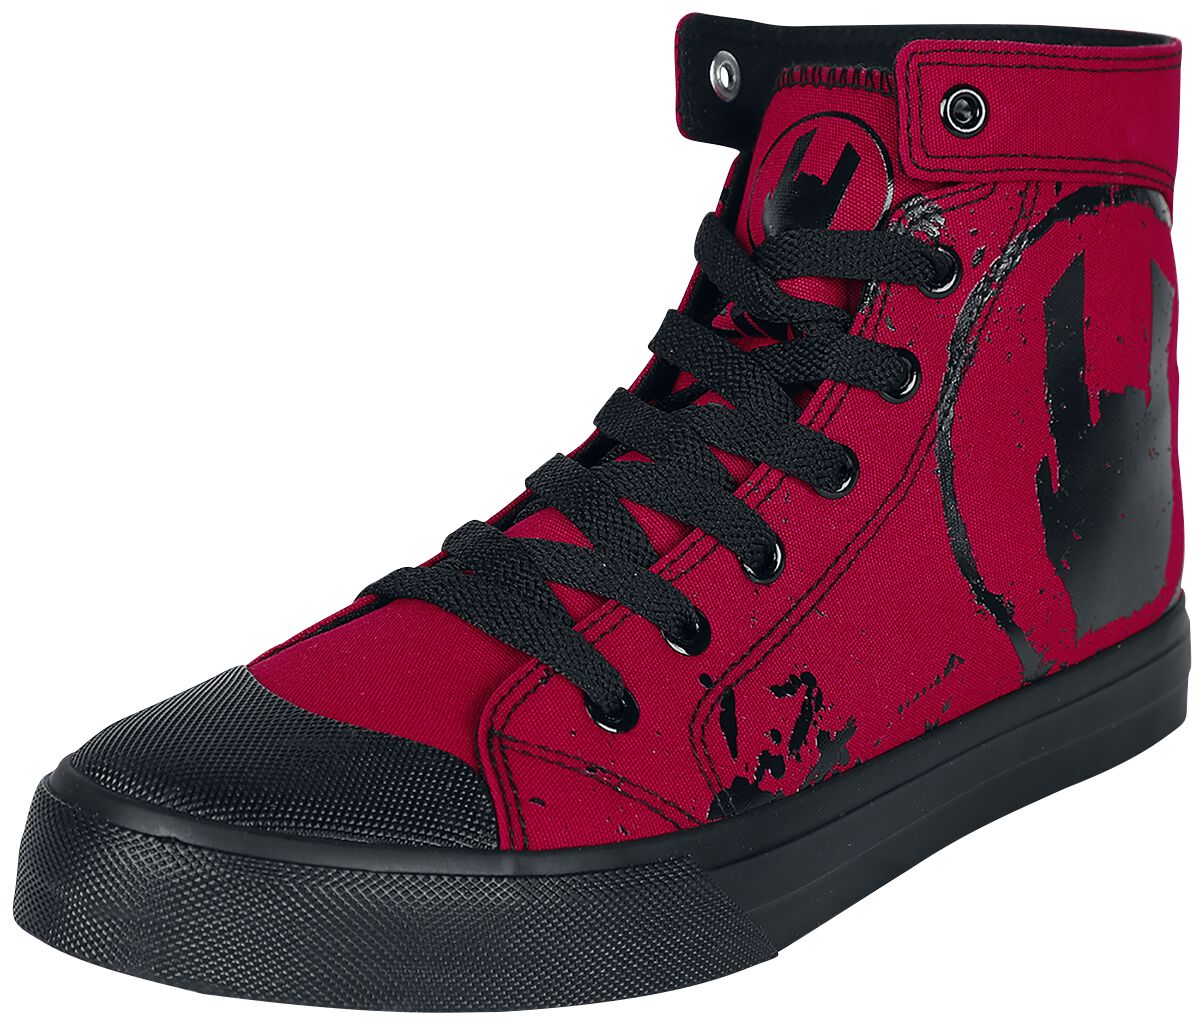 EMP Basic Collection Rote Sneaker mit Rockhand-Print Sneaker high rot